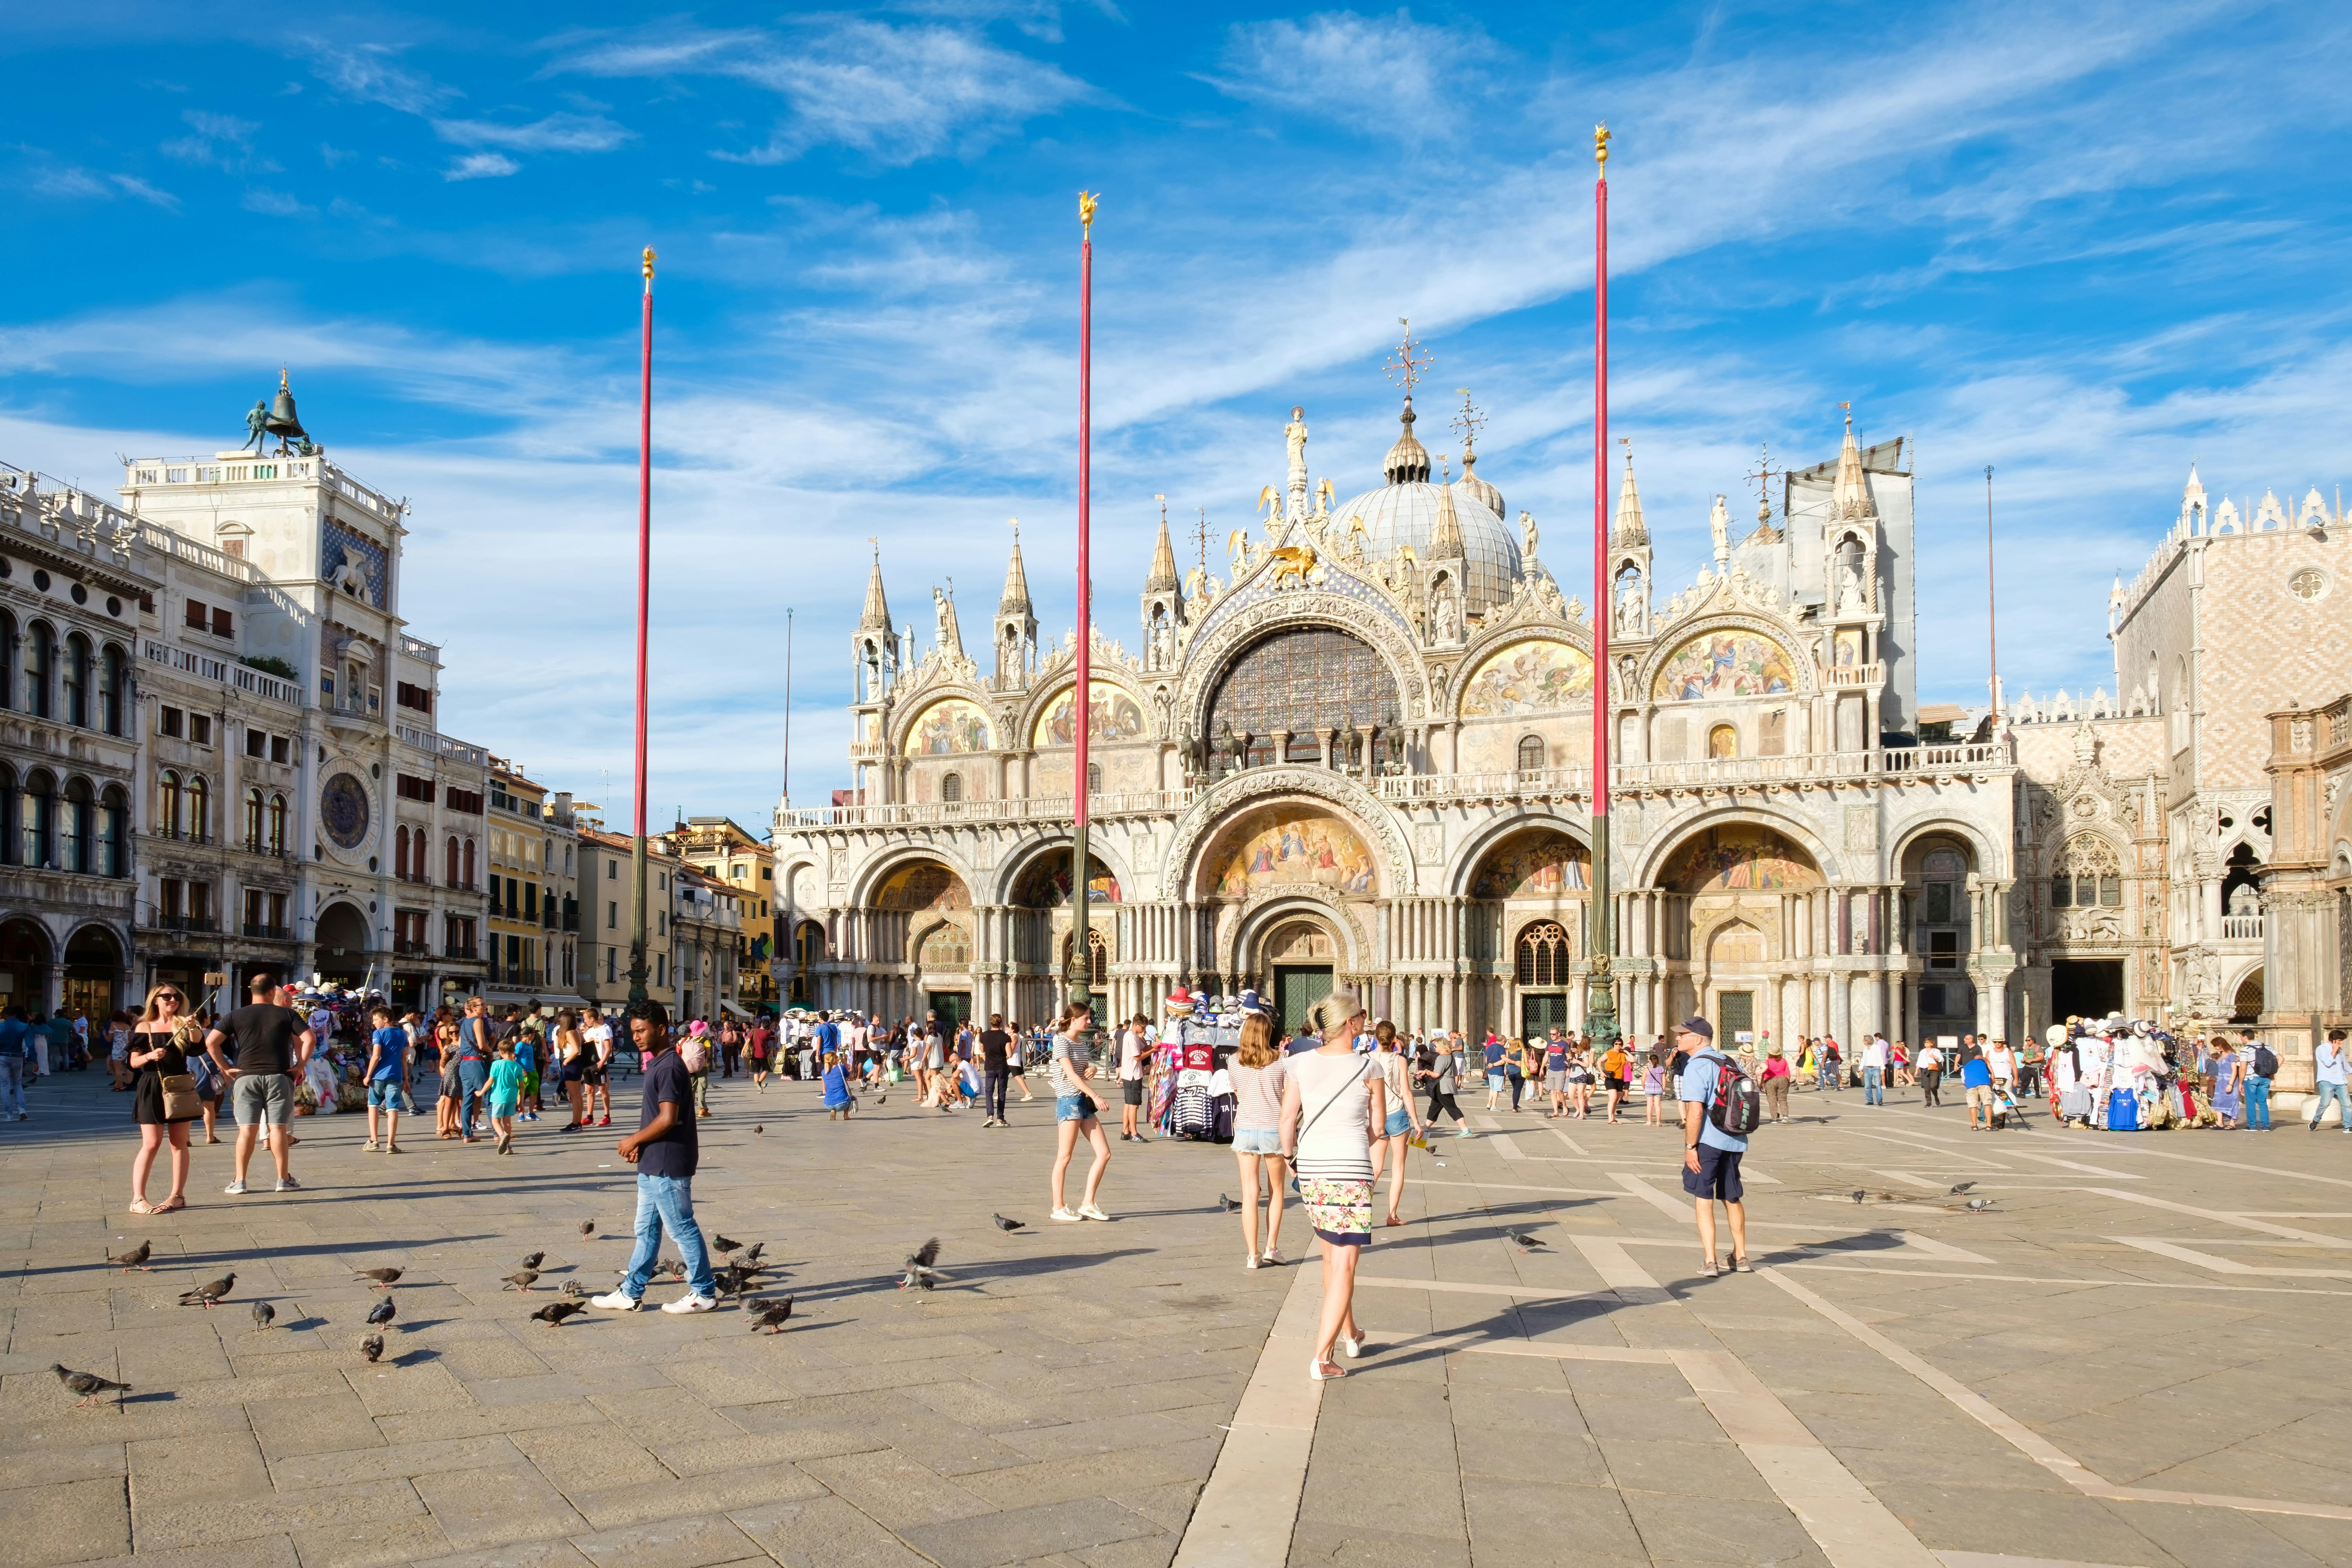 St Mark's Square in Venice on a sunny summer day. There are a few people and pigeons in the large tiled square and St Mark's Basilica is in the background. 